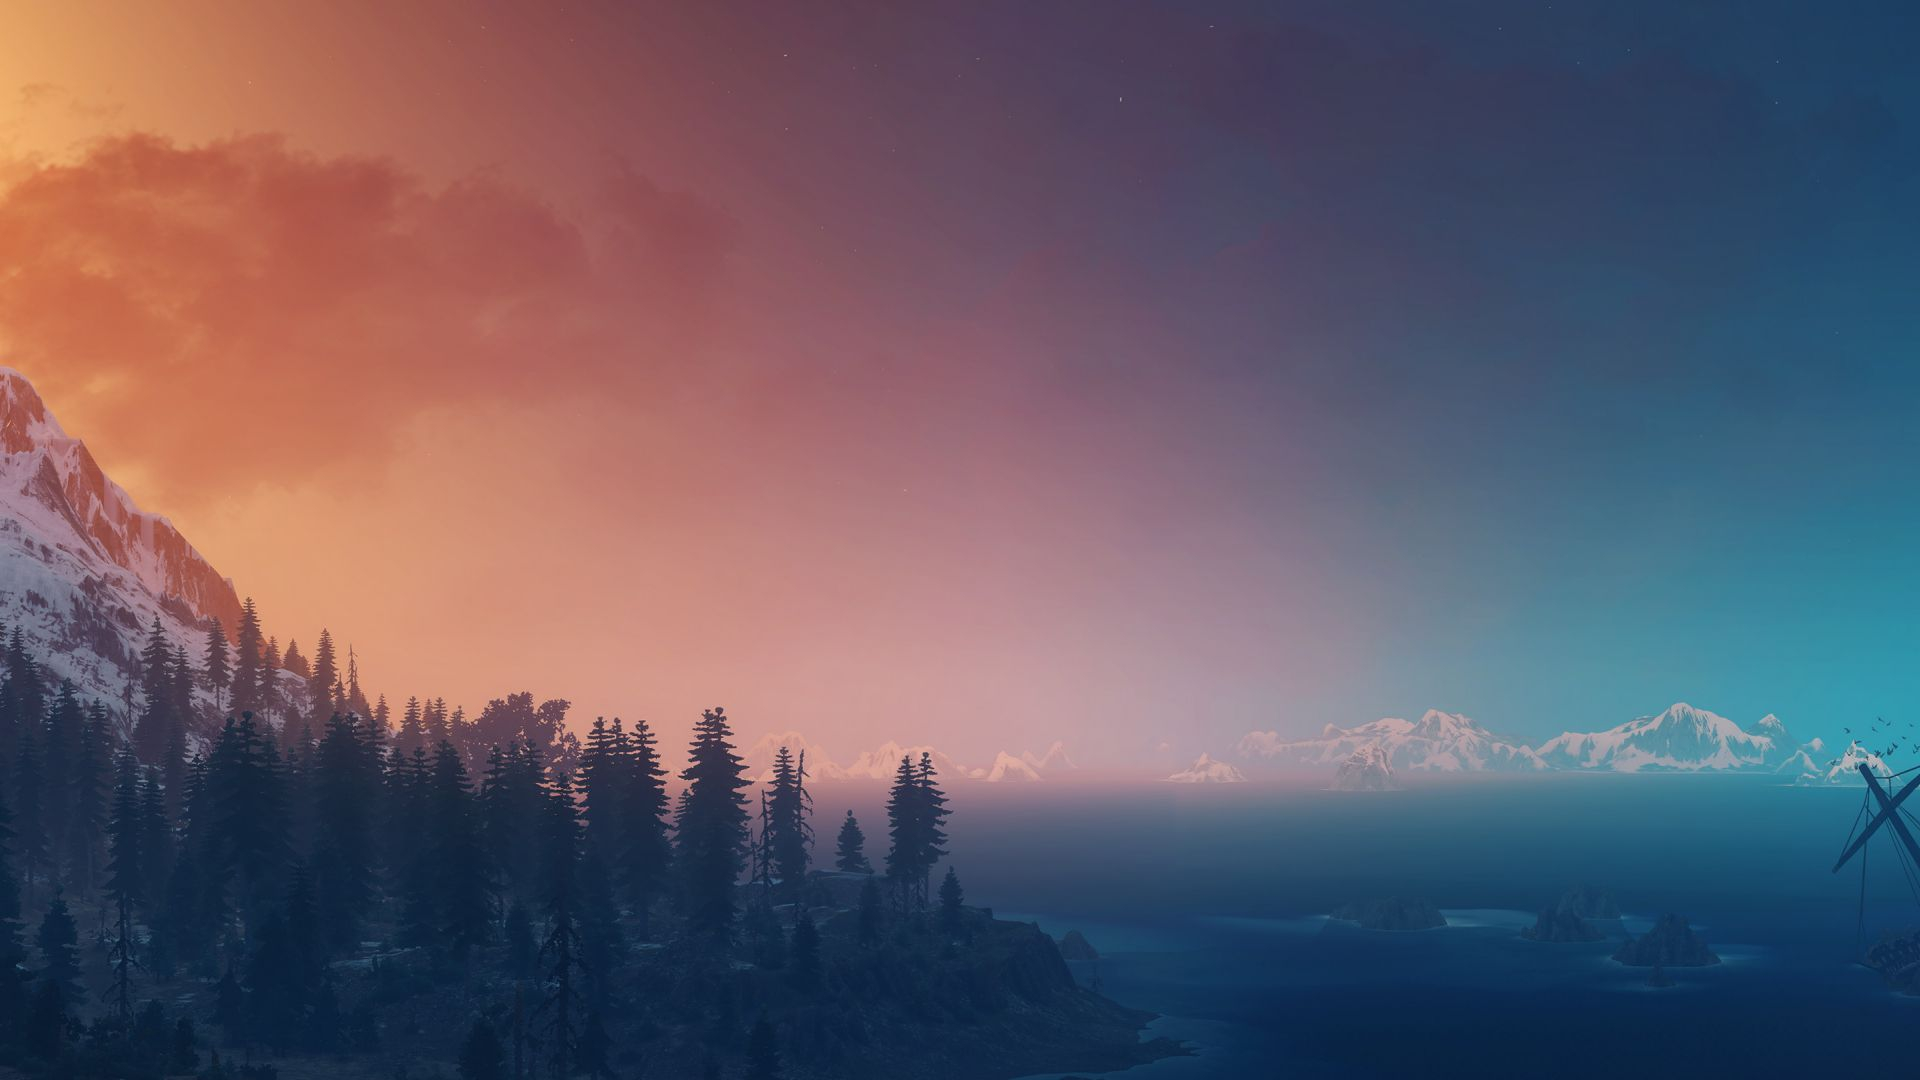 1920x1080 Desktop Wallpaper The Witcher 3: Wild Hunt, Landscape, 5k, Panorama, Hd Image, Picture, Background, 0b7f60